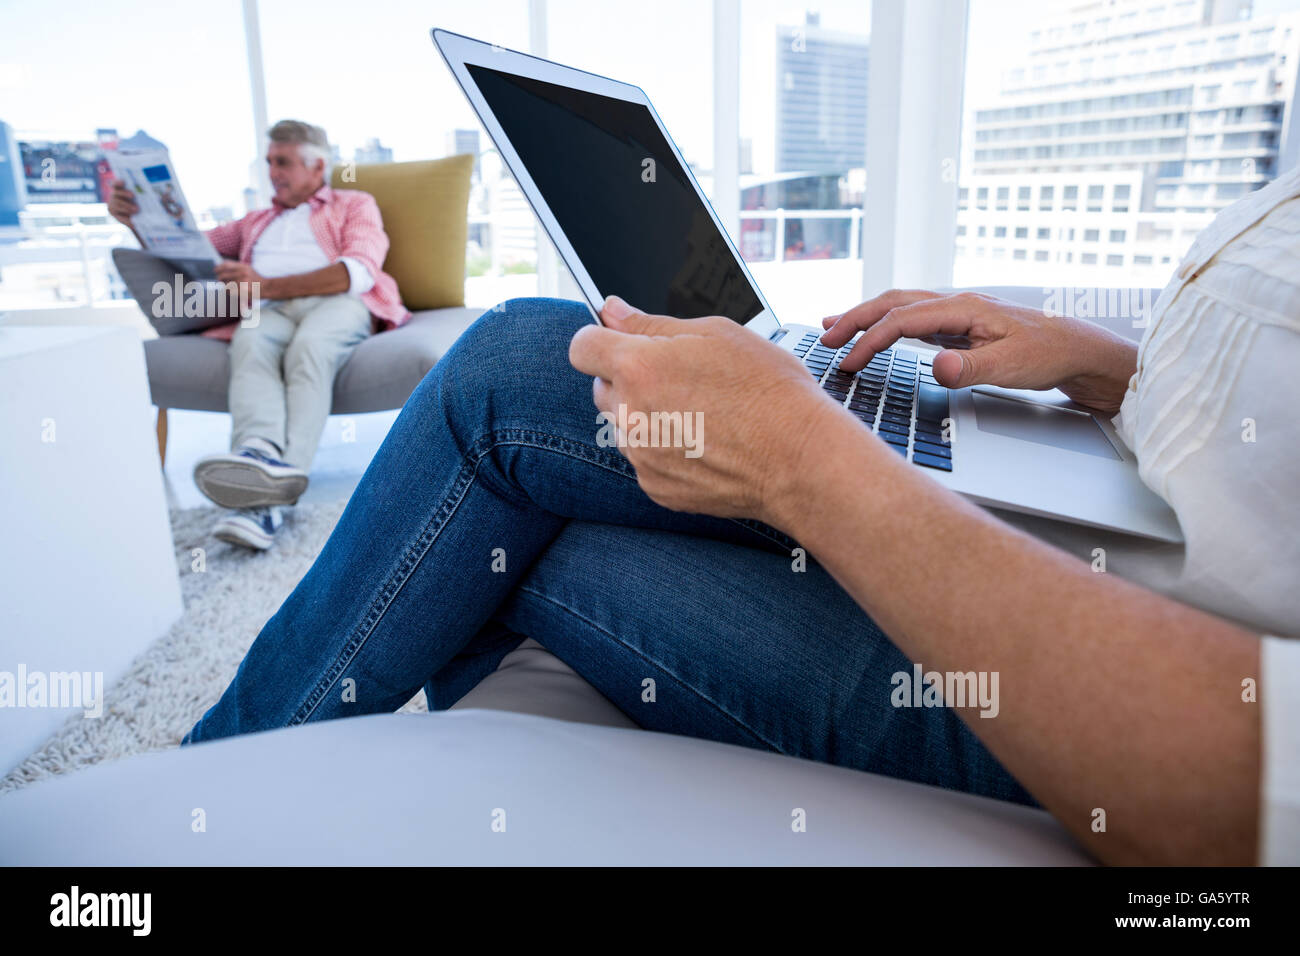 Midsection of Woman using laptop while man reading newspaper Stock Photo